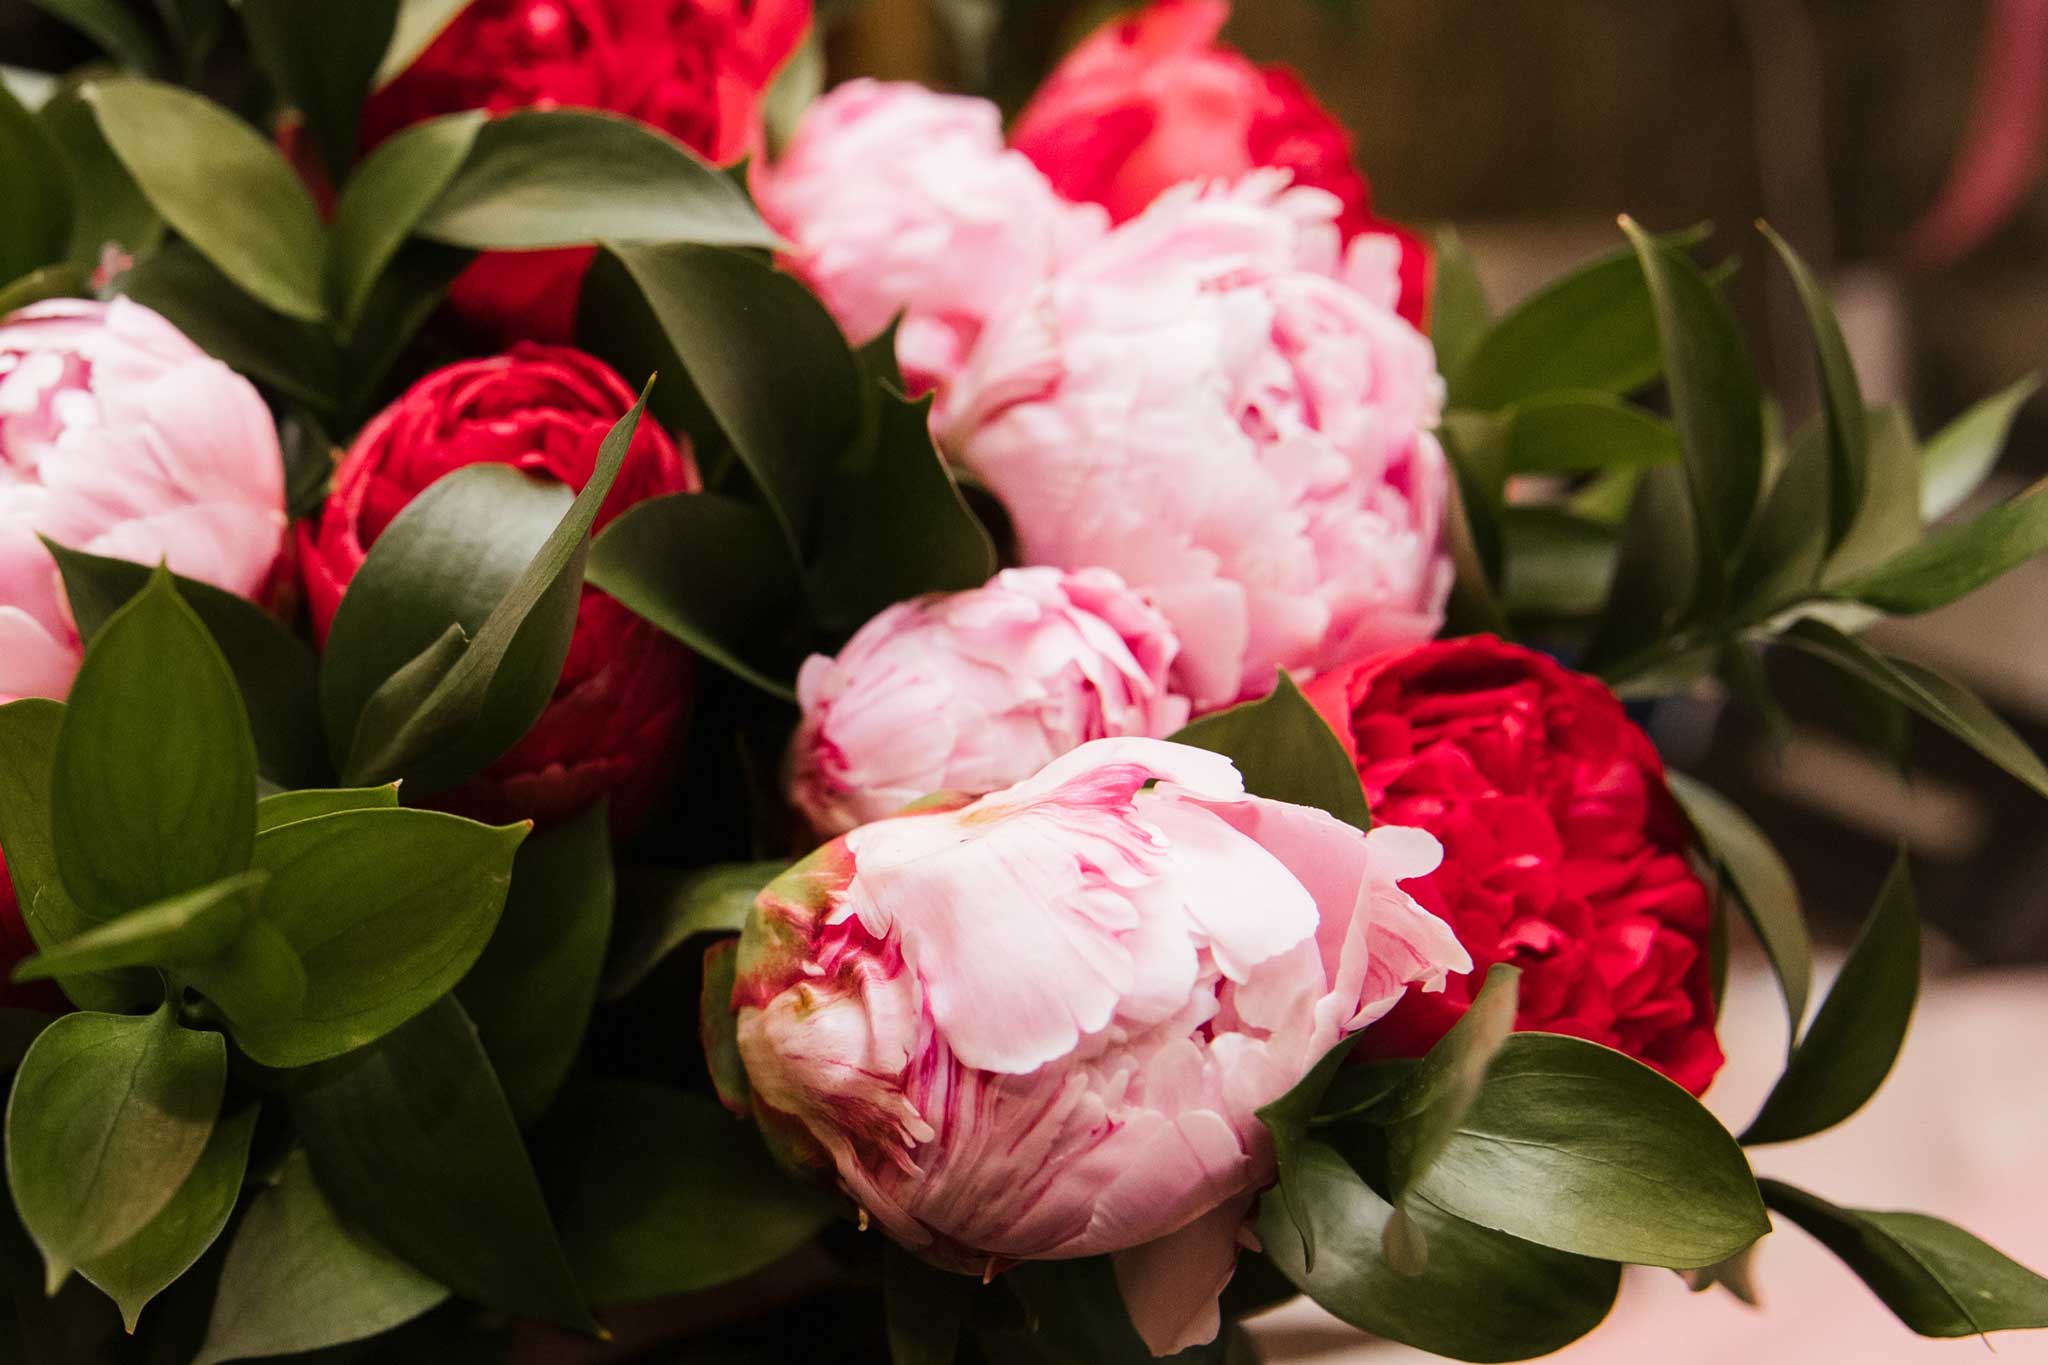 pale pink and red peony bouquet with lush green foliage